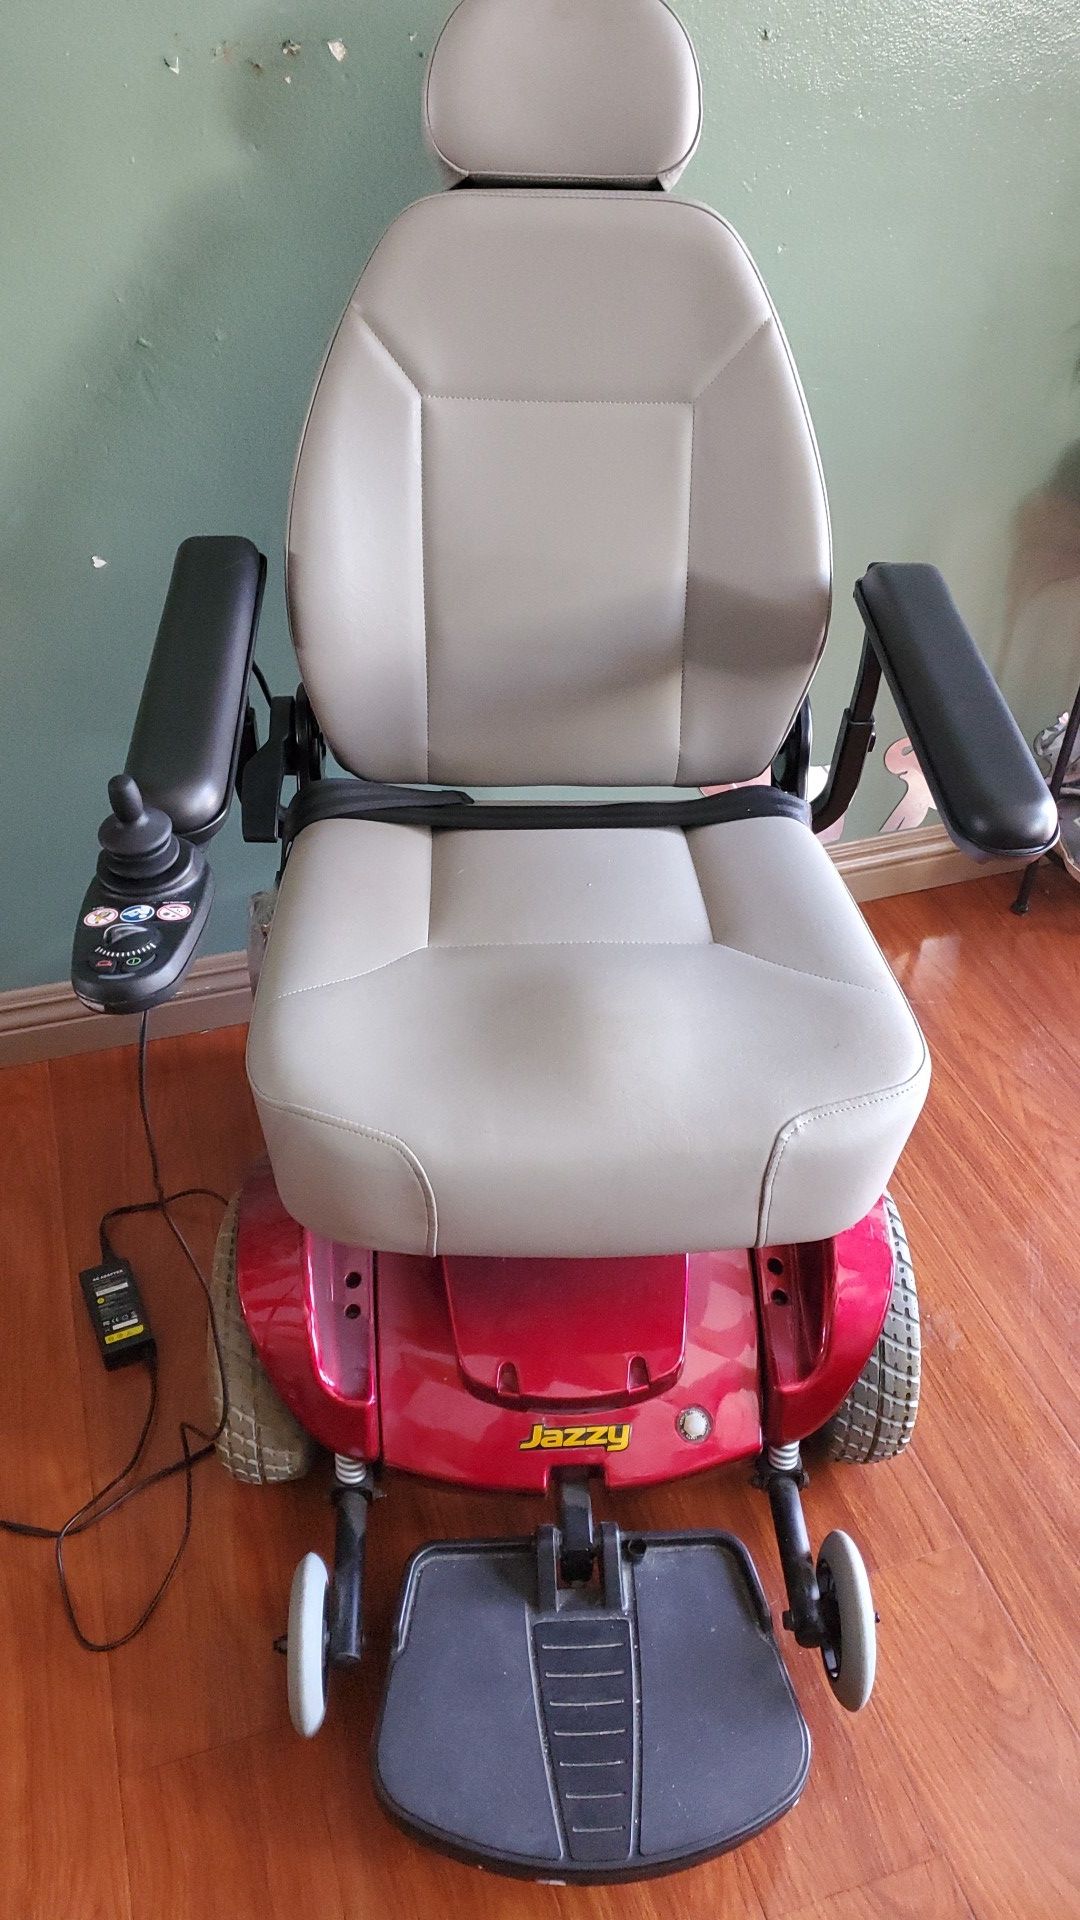 Jazzy select gt power chair